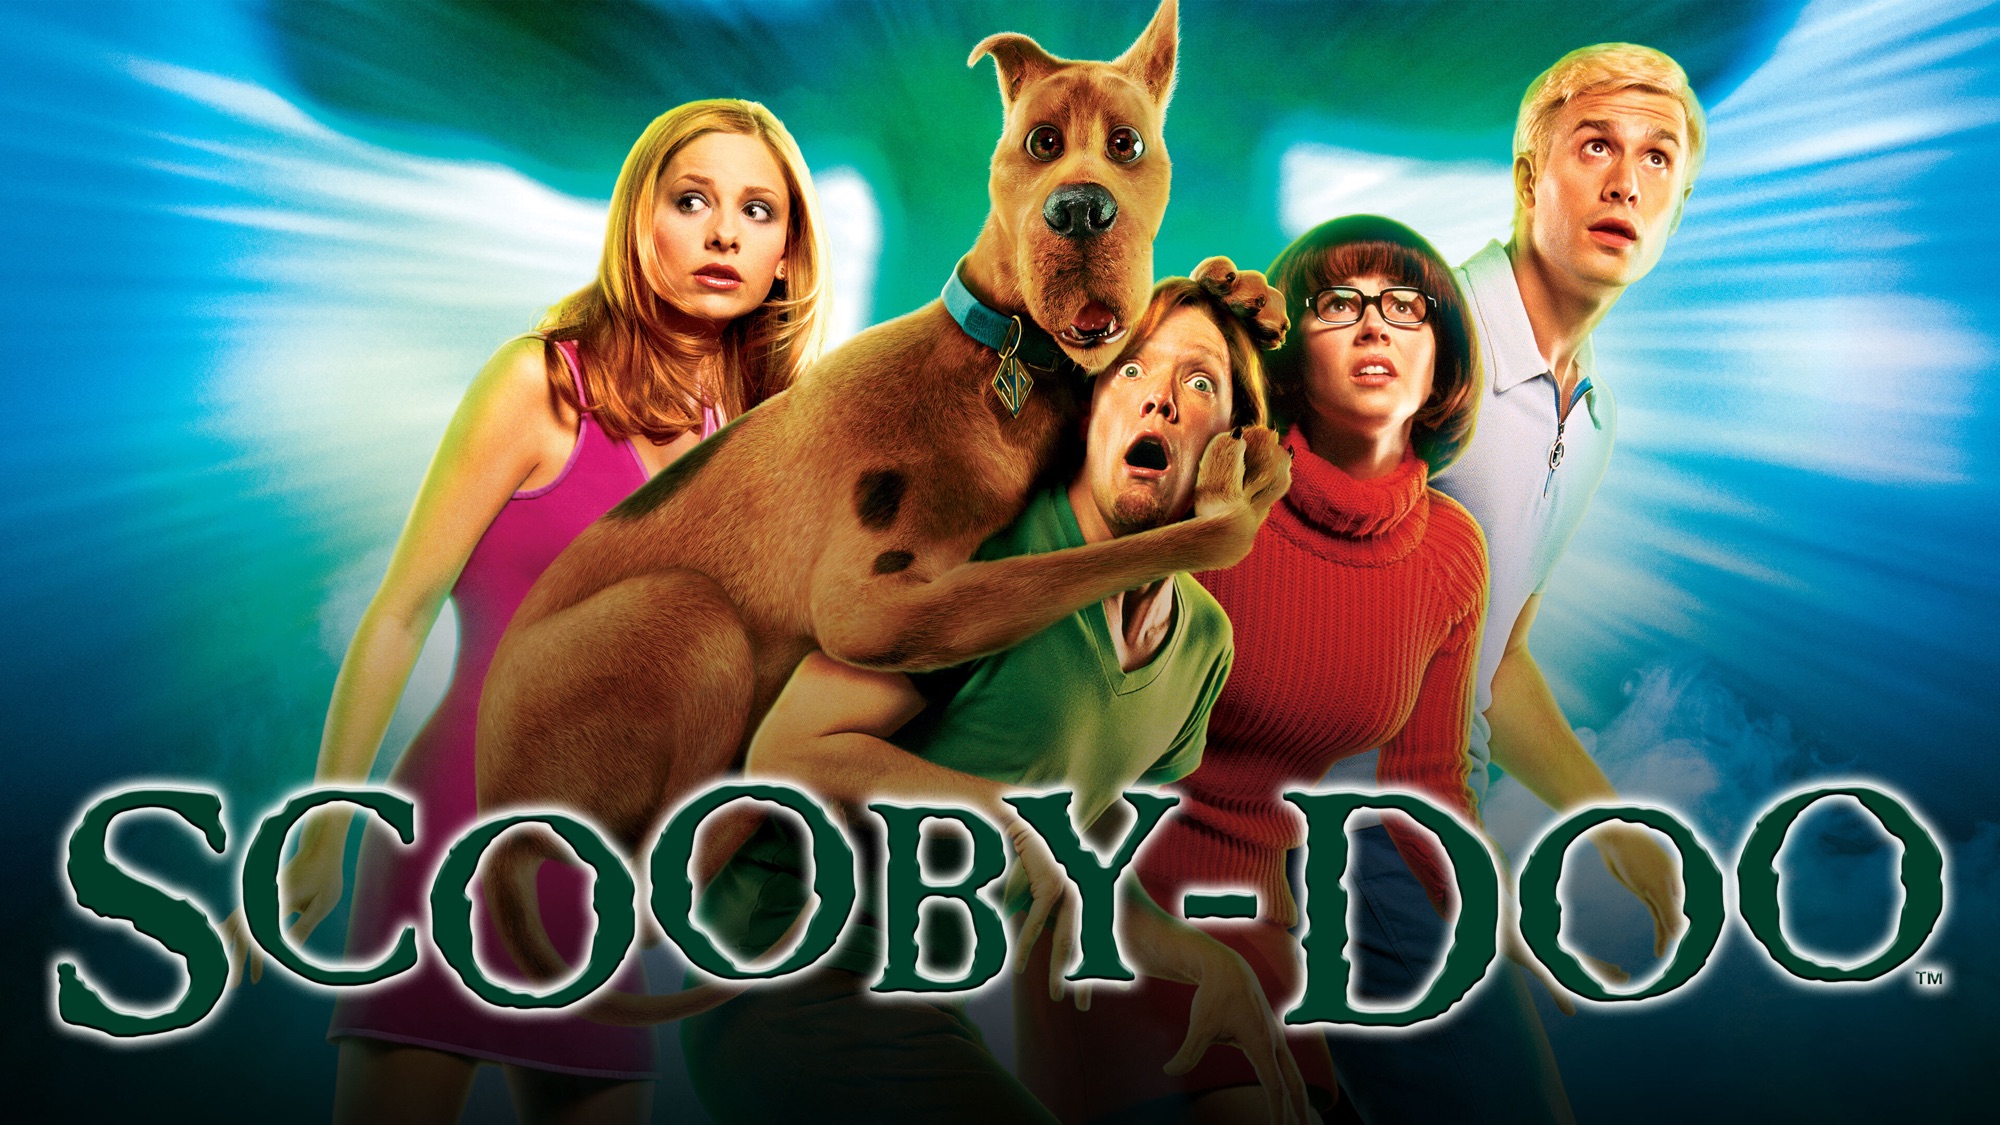 scooby doo hd desktop wallpaper 19201080 shaggy  Free Phone Wallpapers  For Mobile Cell Backgrounds